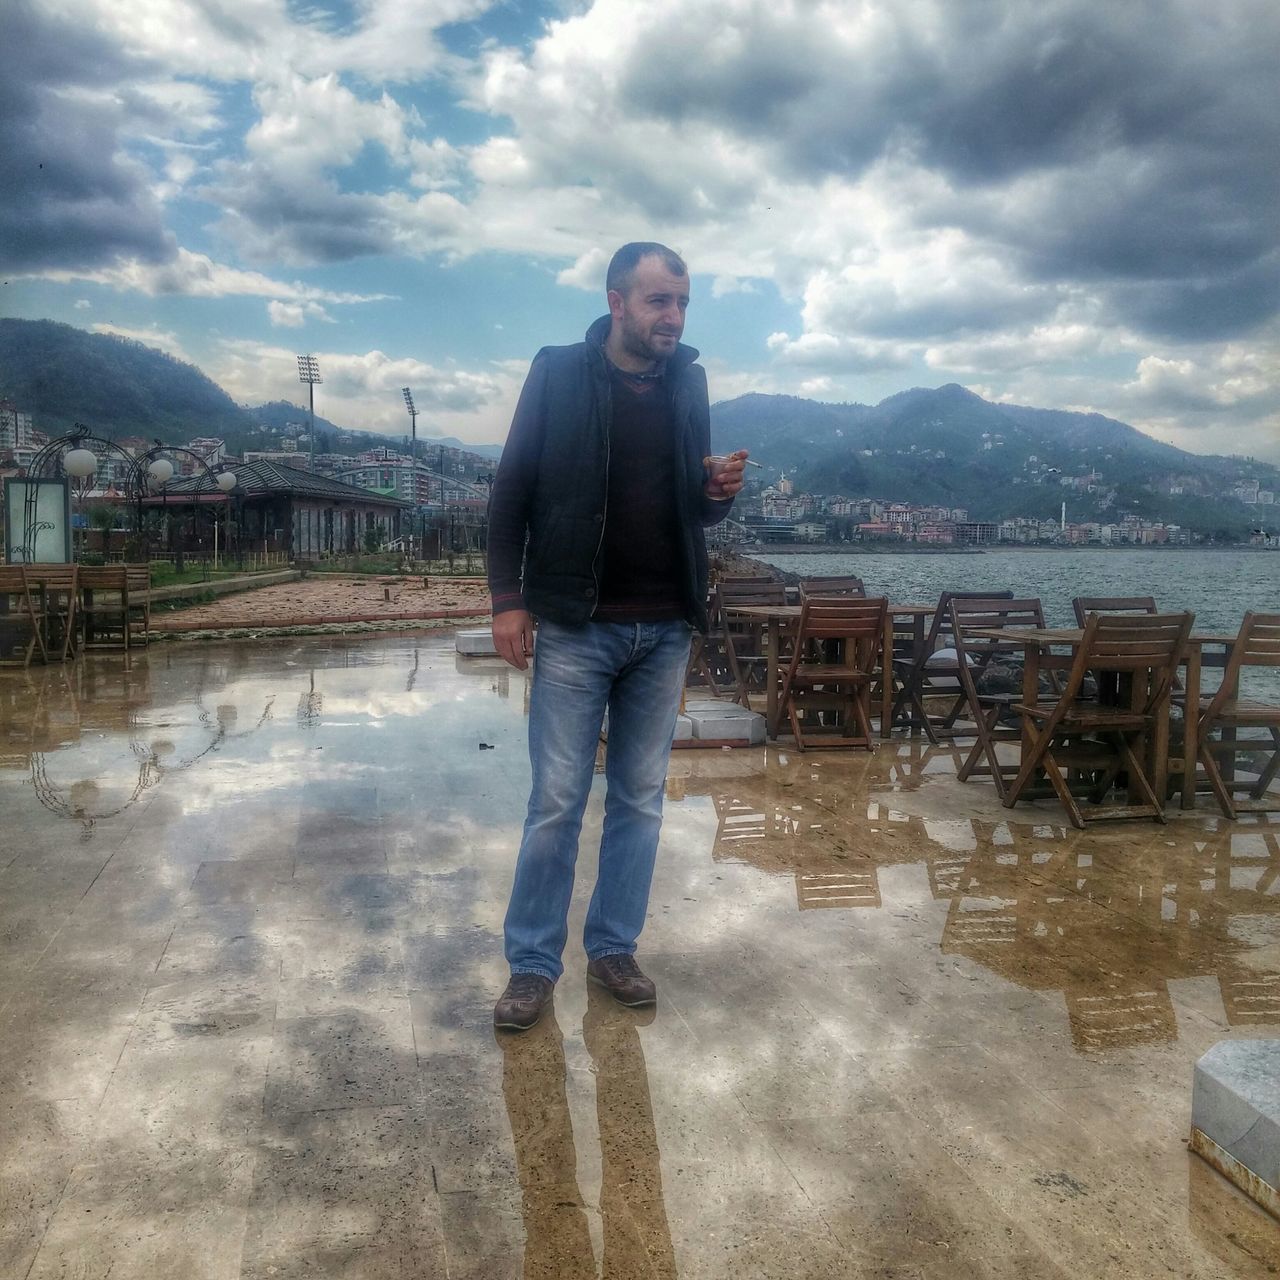 sky, lifestyles, building exterior, casual clothing, built structure, cloud - sky, architecture, standing, water, leisure activity, young adult, full length, person, young men, cloud, cloudy, three quarter length, mountain